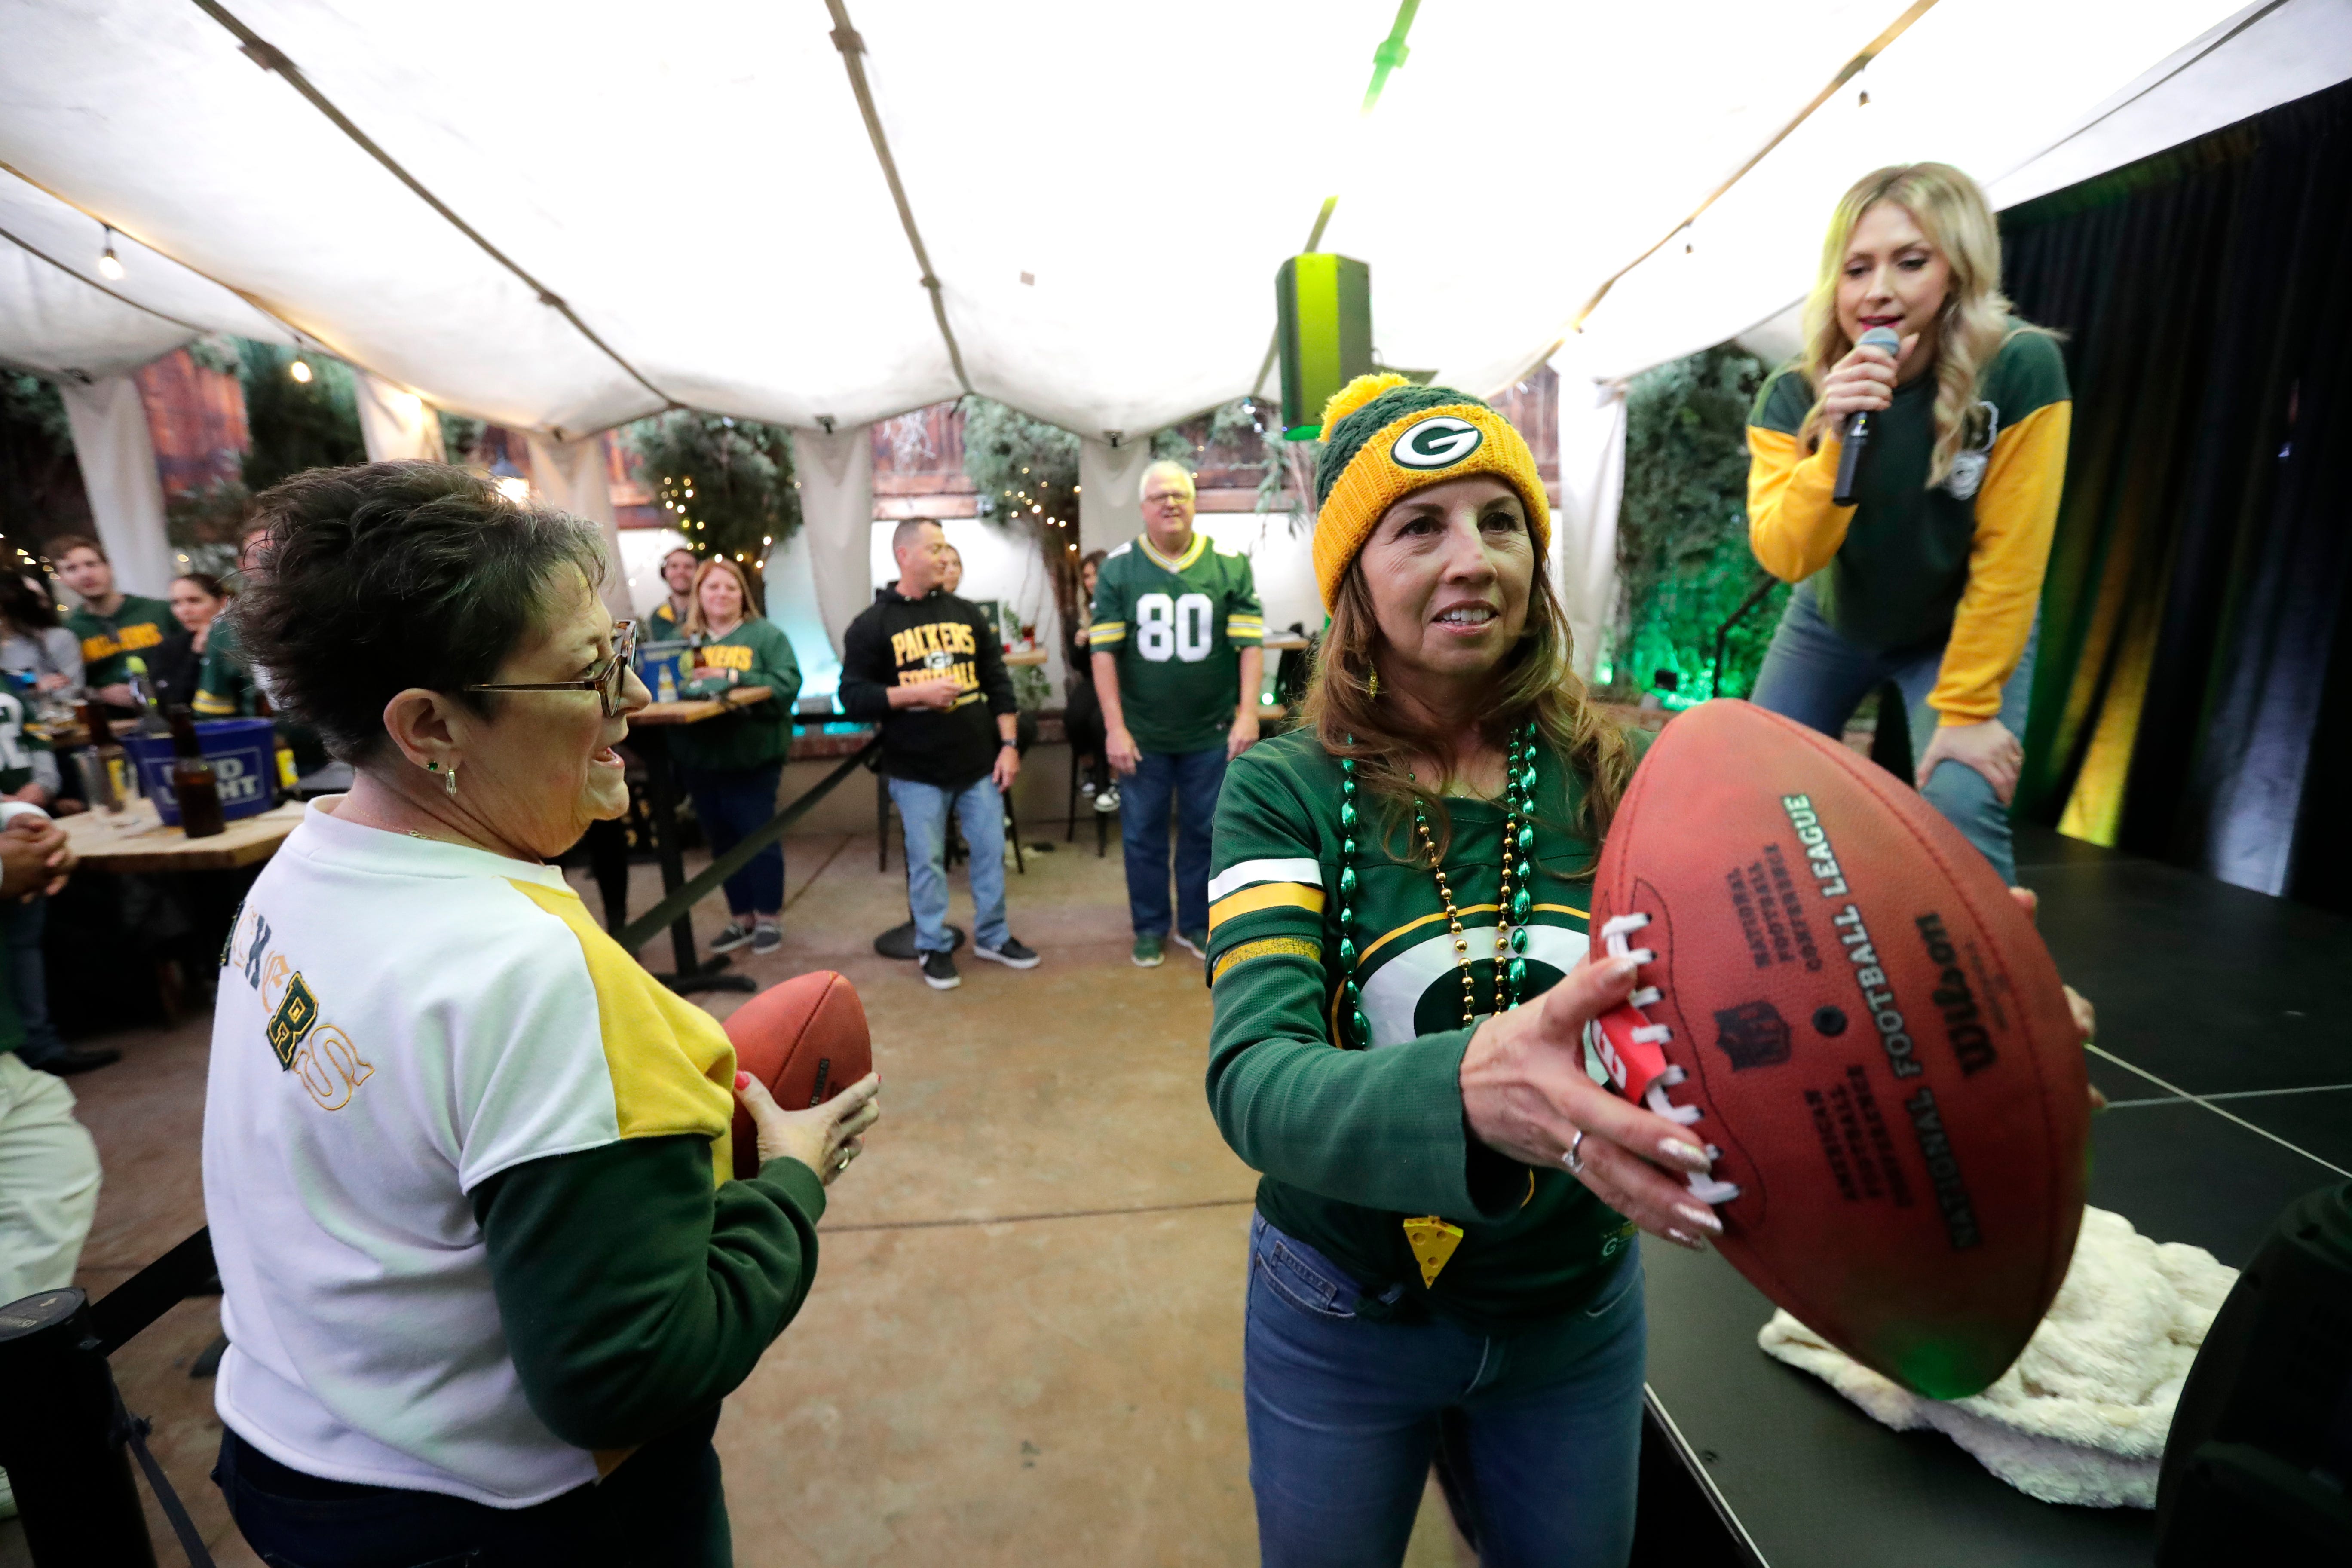 Green Bay Packers fans participate in a game to win prizes during the Packers Everywhere pep rally Friday, January 19, 2024, at The Patio in Palo Alto, California.